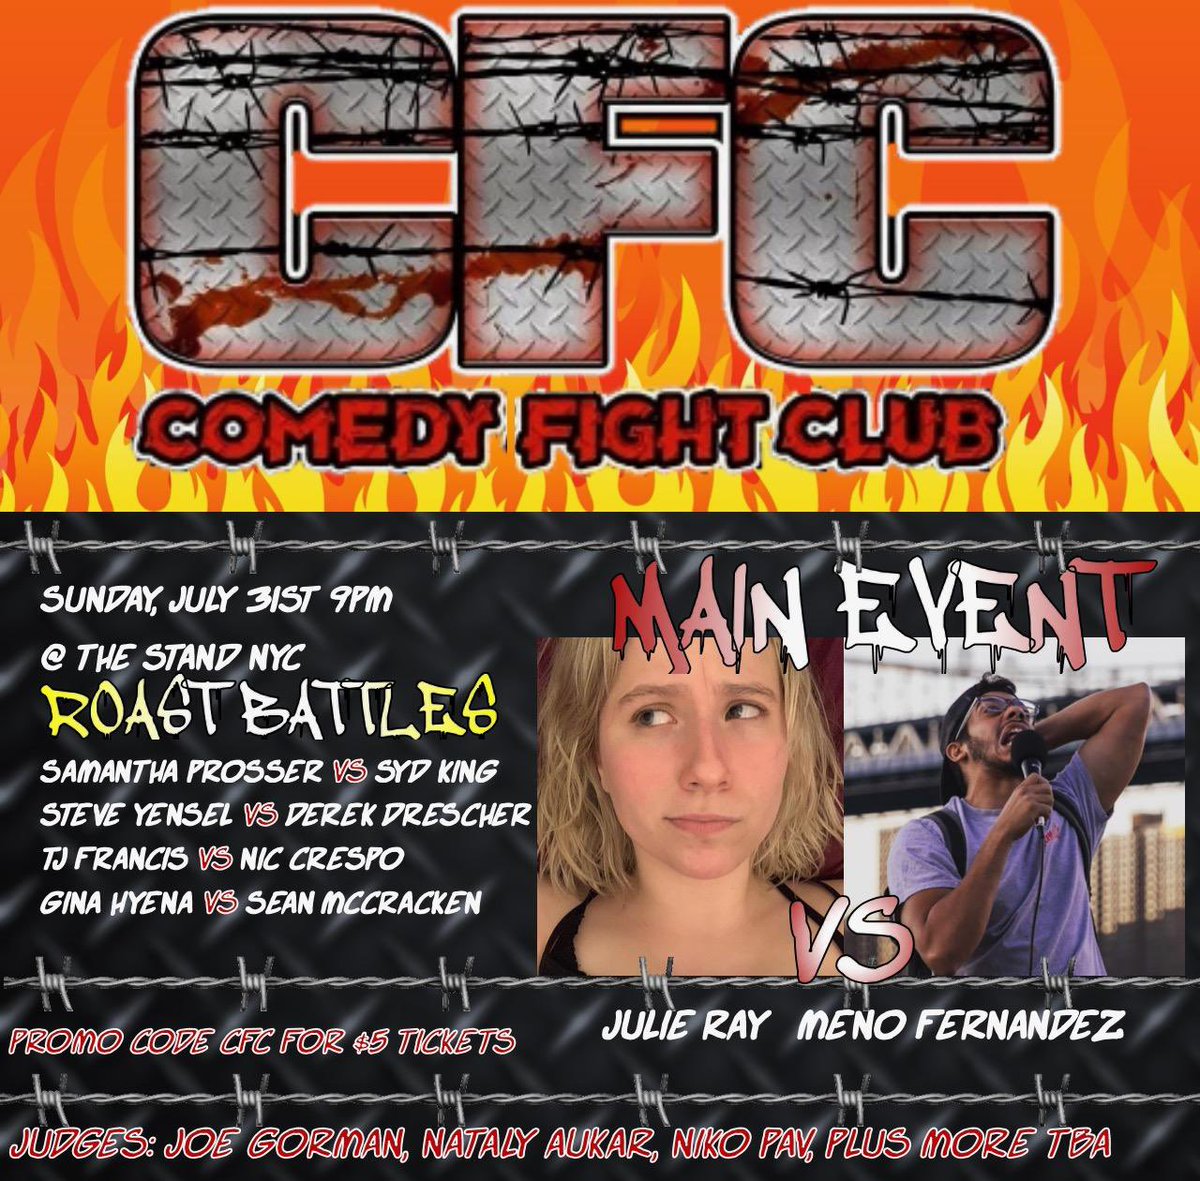 SUNDAY!! Don’t miss out on the last CFC of the Summer!! Closing out the summer strong by heading to @TheStandNYC tix link is up and we’ve already got some tix sales so don’t wait!! The hottest show of the year in the hottest club with the hottest line up See you in the arena